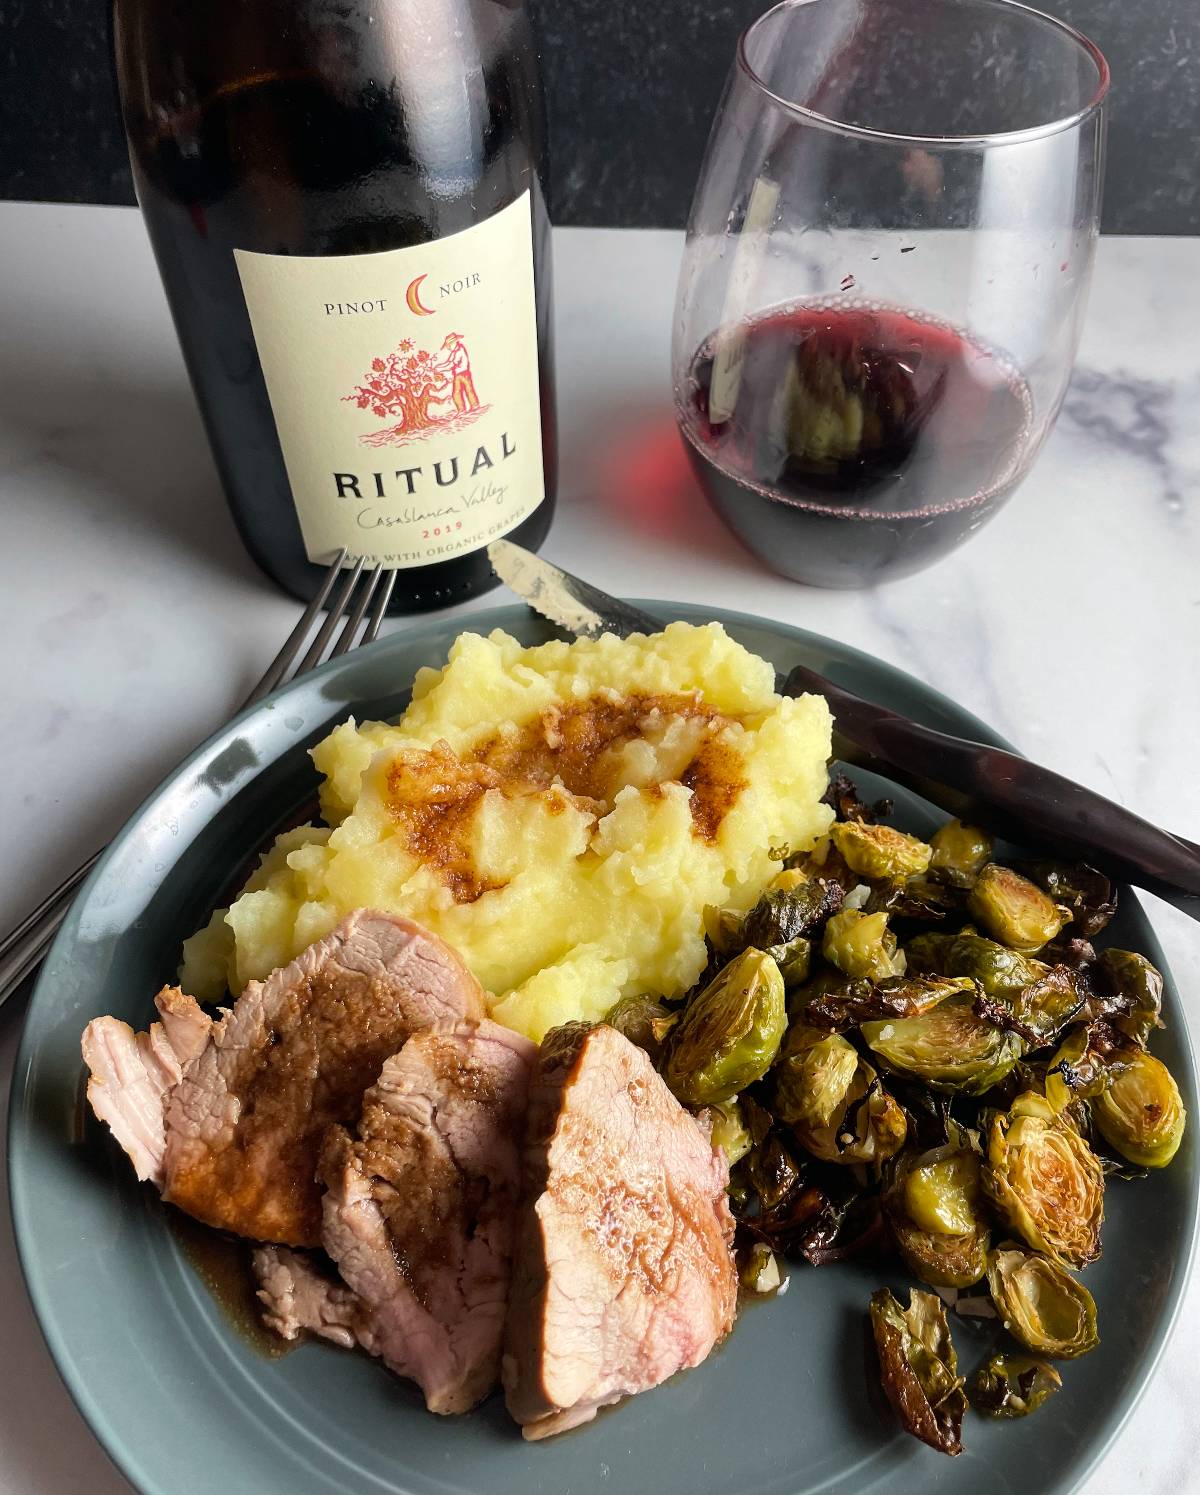 Slices of pork tenderloin along with mashed potatoes and roasted Brussels sprouts, with a Pinot Noir in the background.